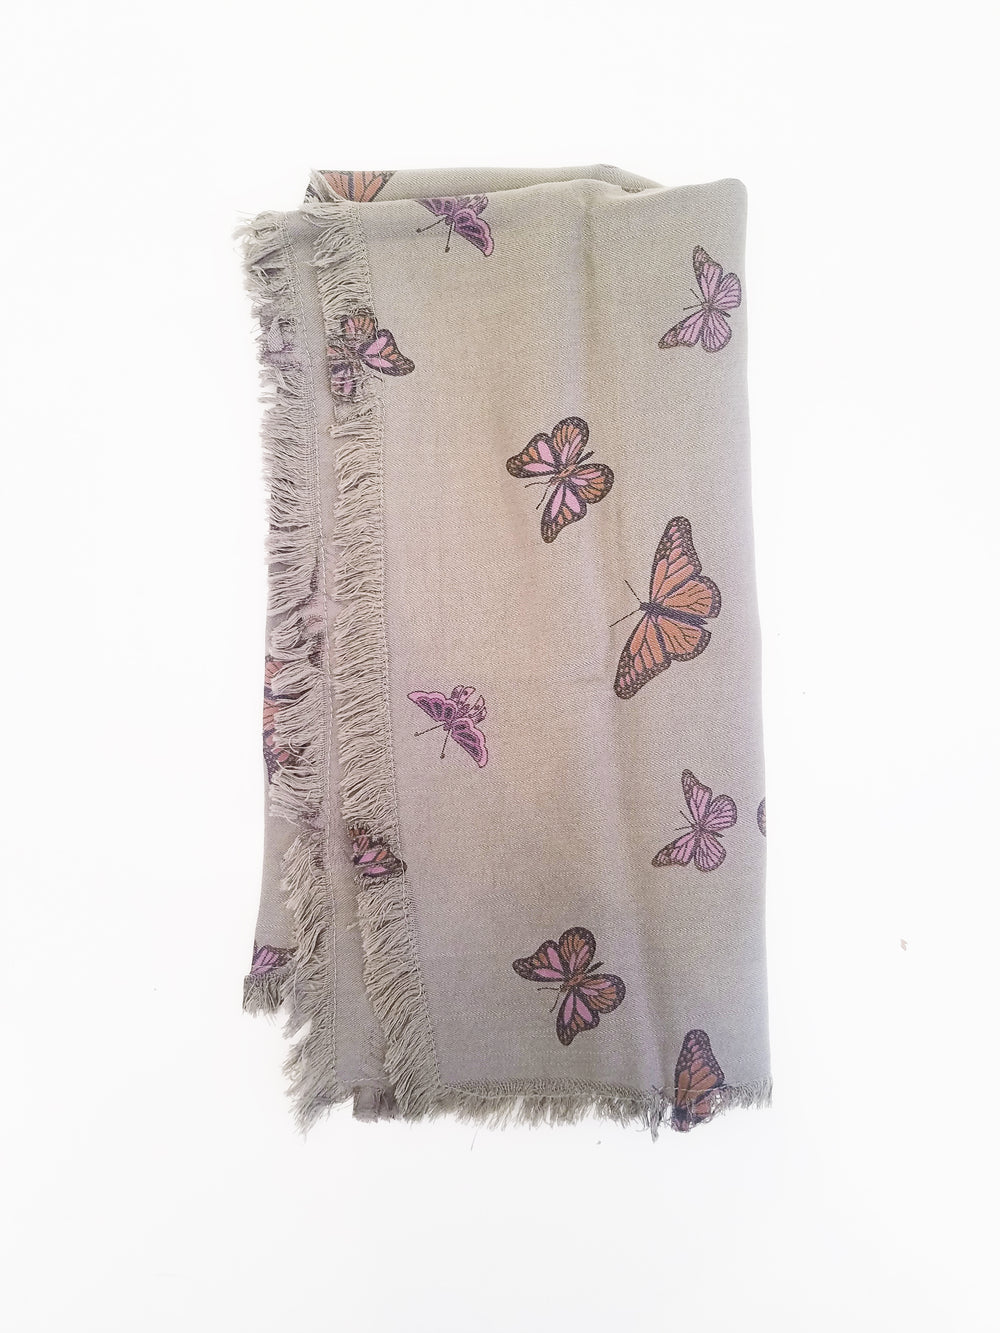 Bandana - Olive Butterfly - Kingfisher Road - Online Boutique